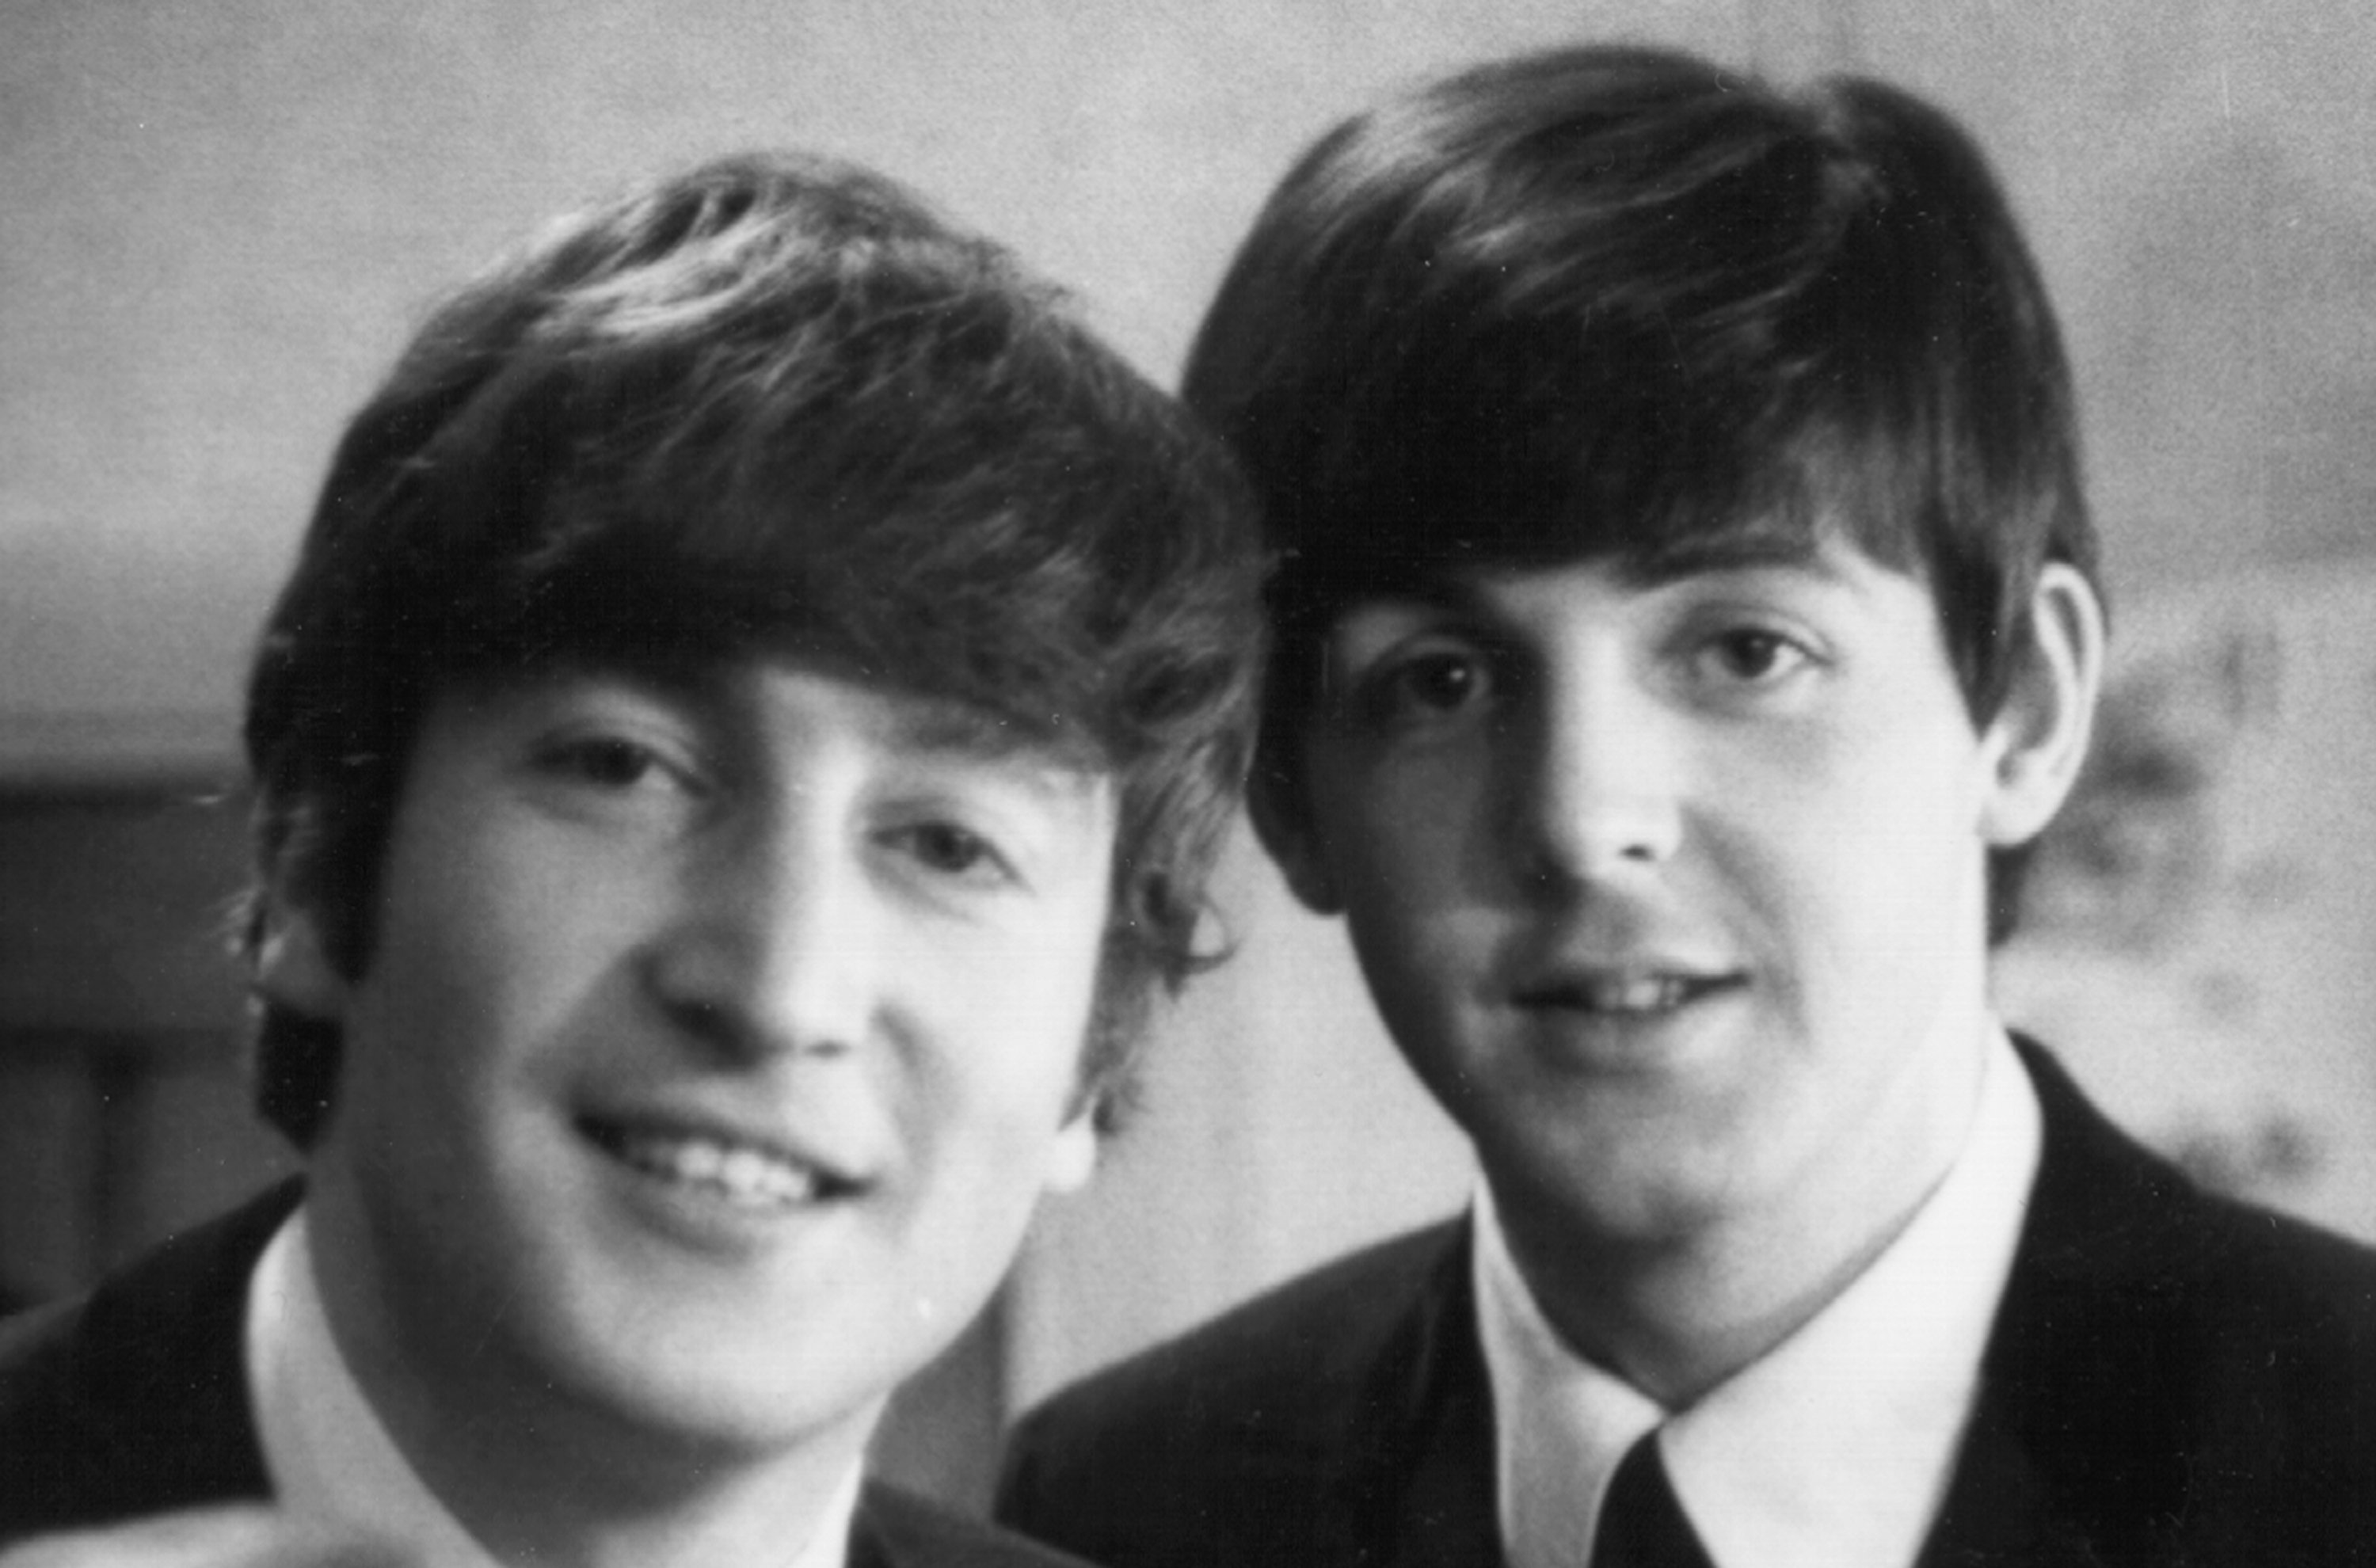 John Lennon and Paul McCartney, who just received AI remakes of their songs, pose for a photo in 1963.